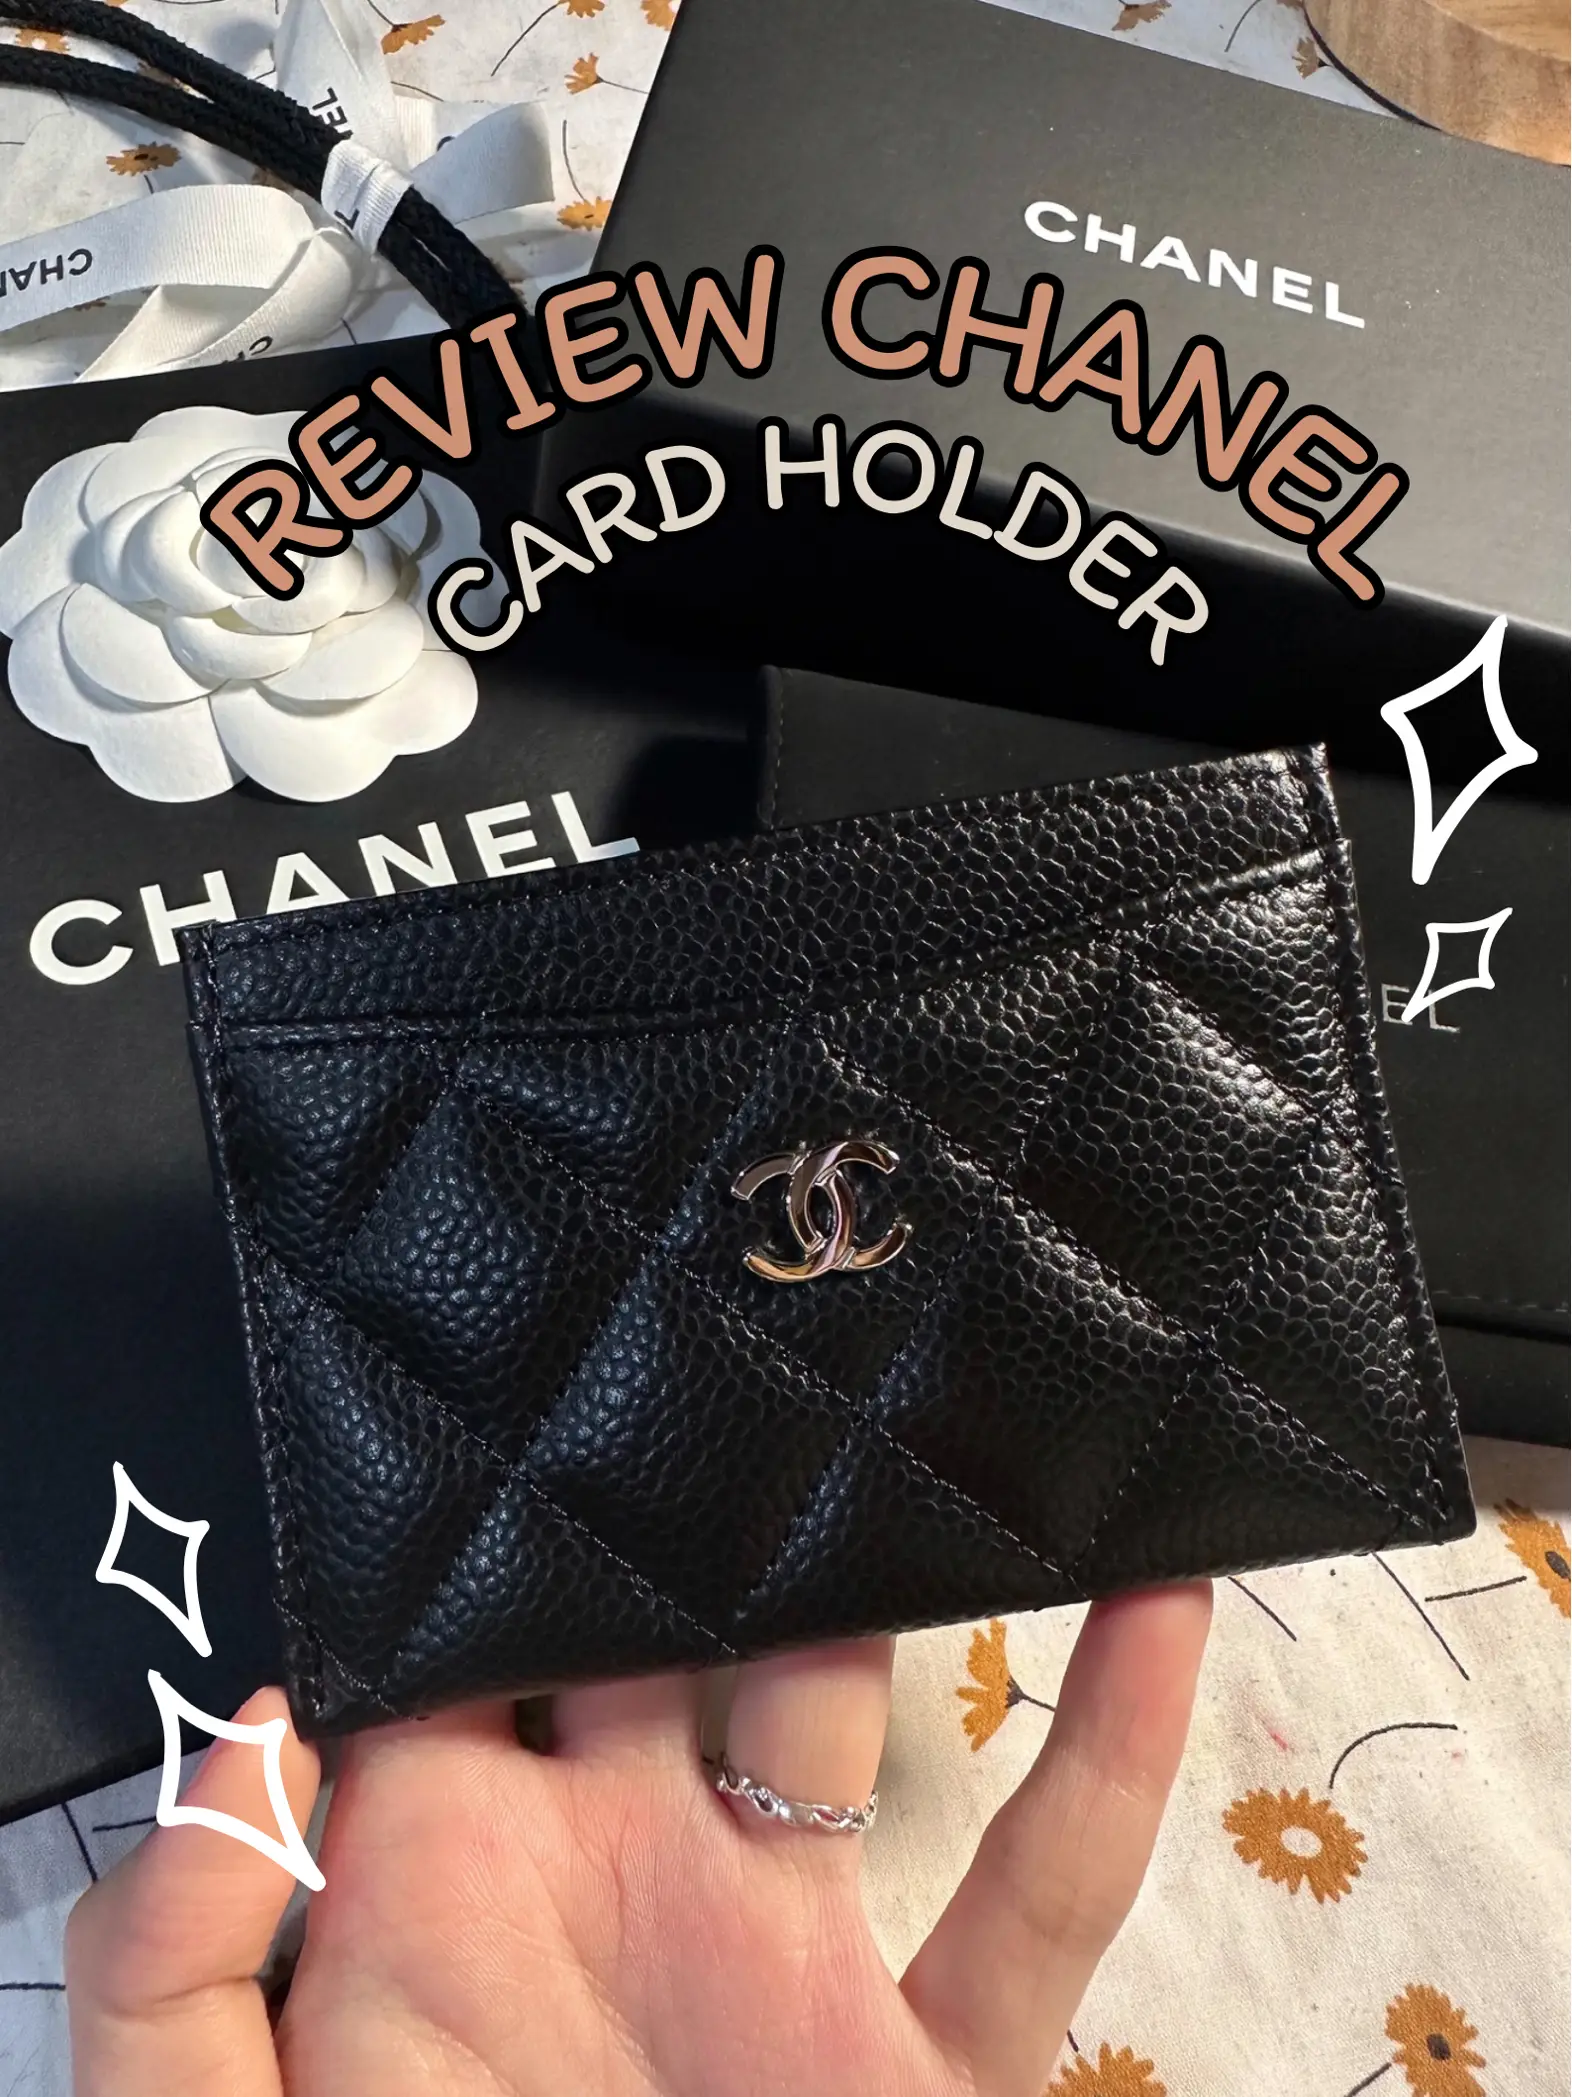 ✨ REVIEW CHANEL CARD HOLDER 💸, Gallery posted by GRACEZY